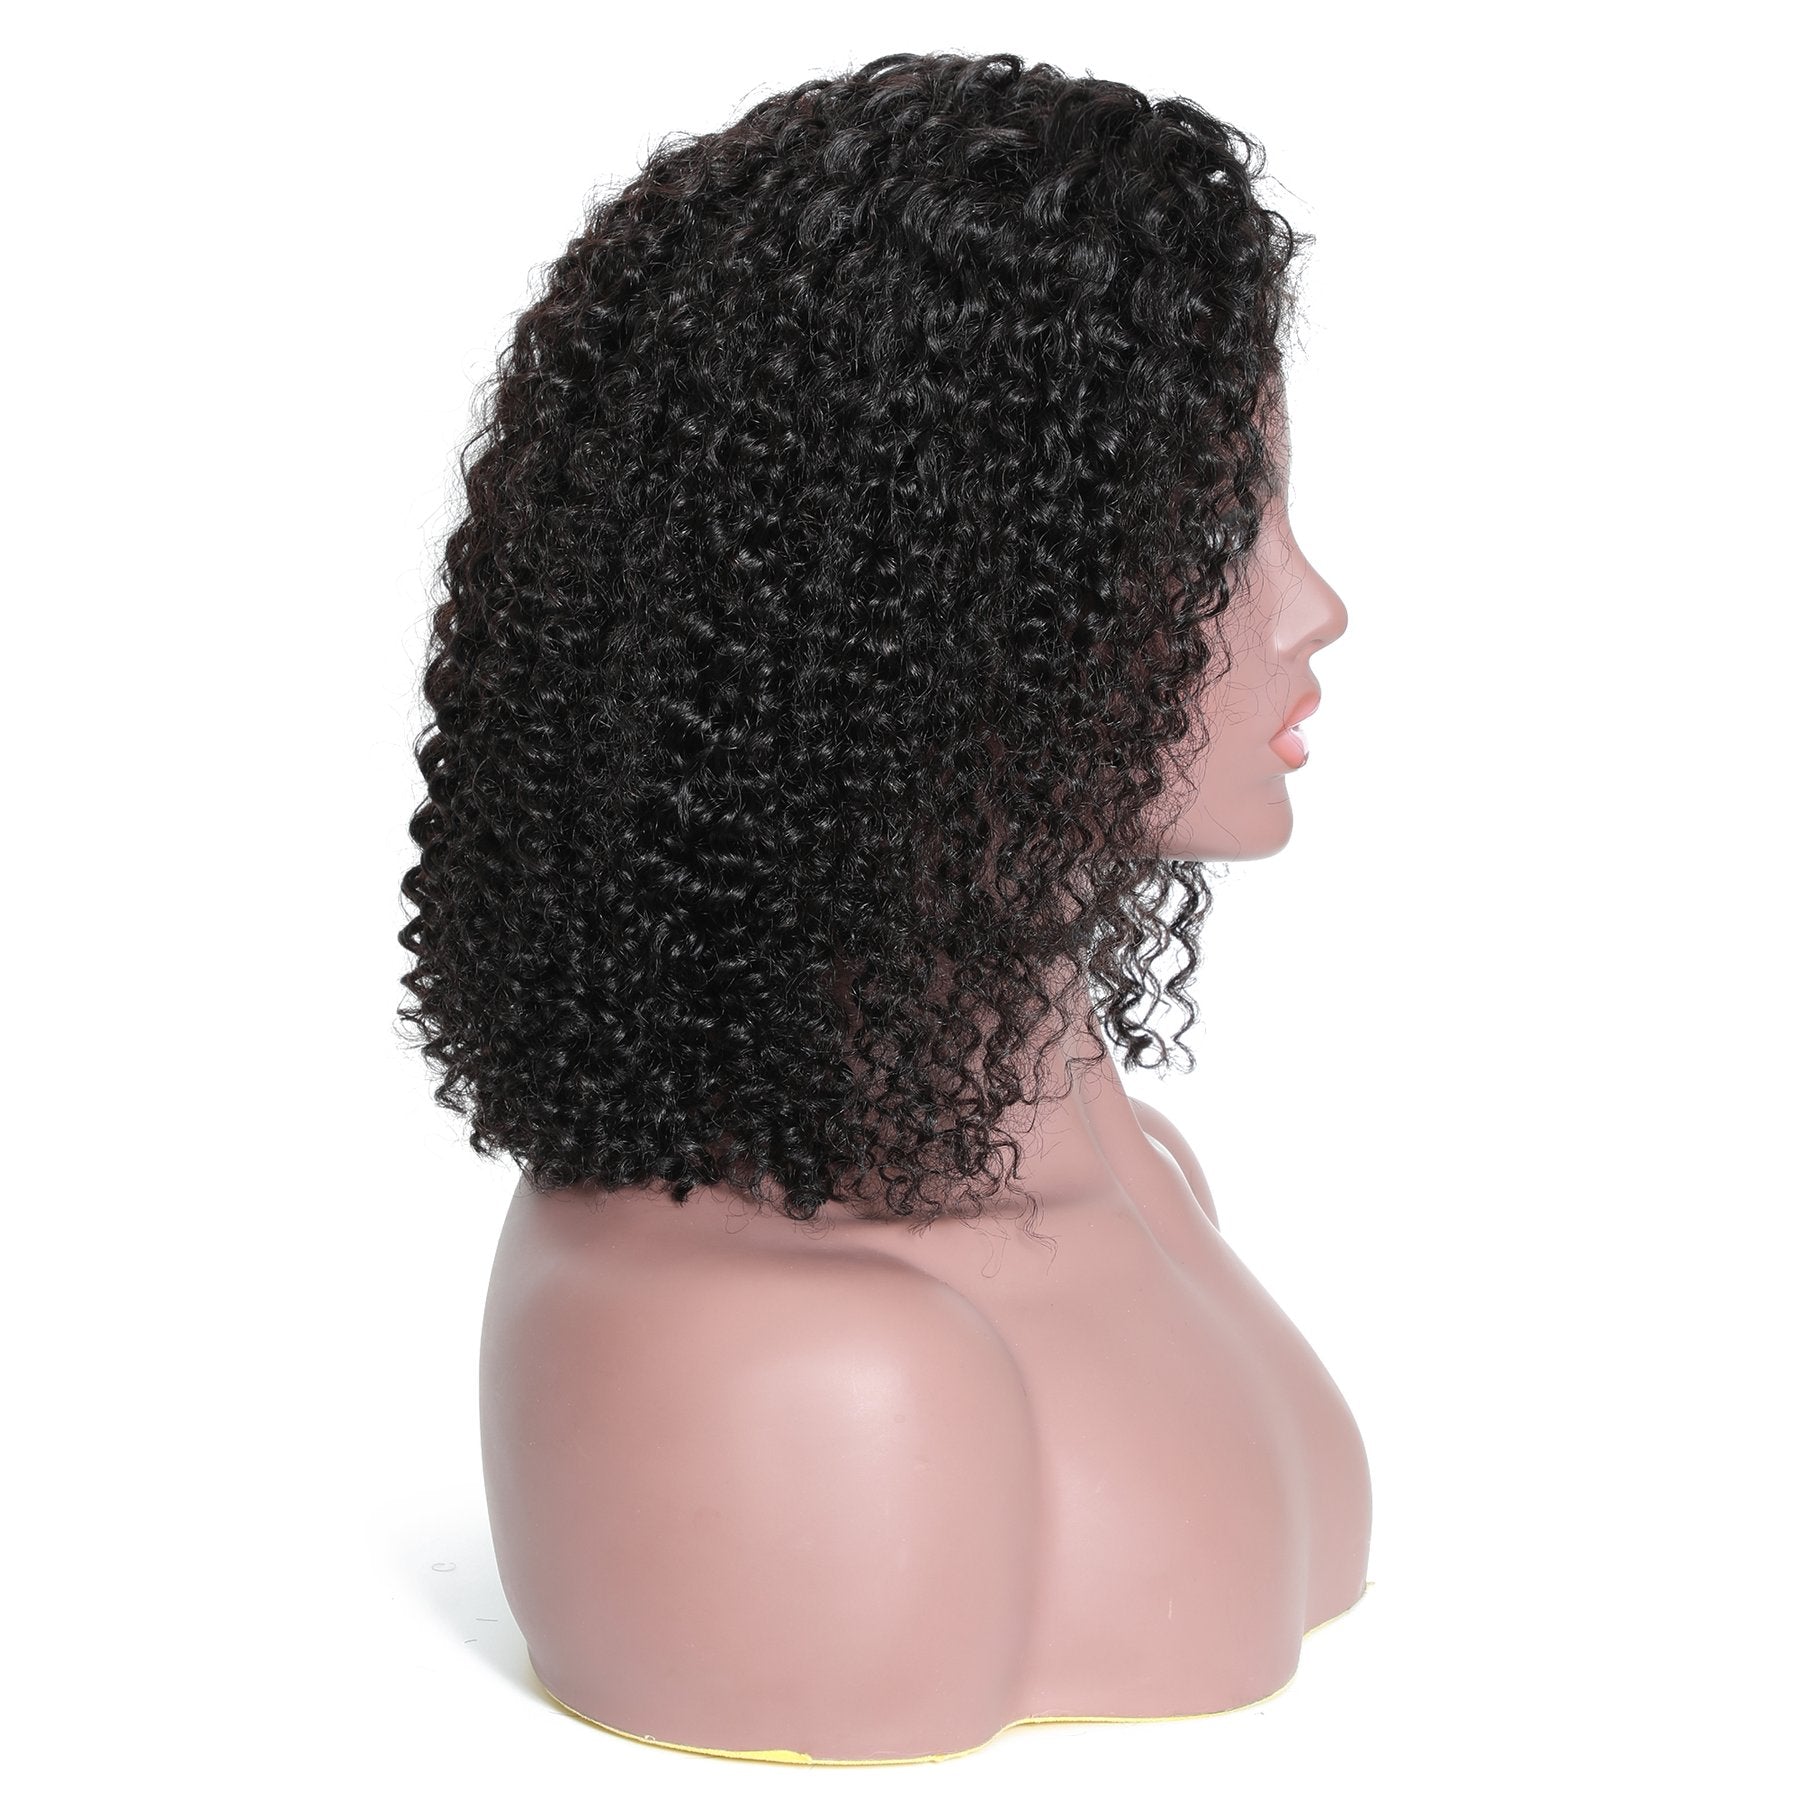 Msbeauty Short Curly Lace Front Human Hair Wig - MSBEAUTY HAIR